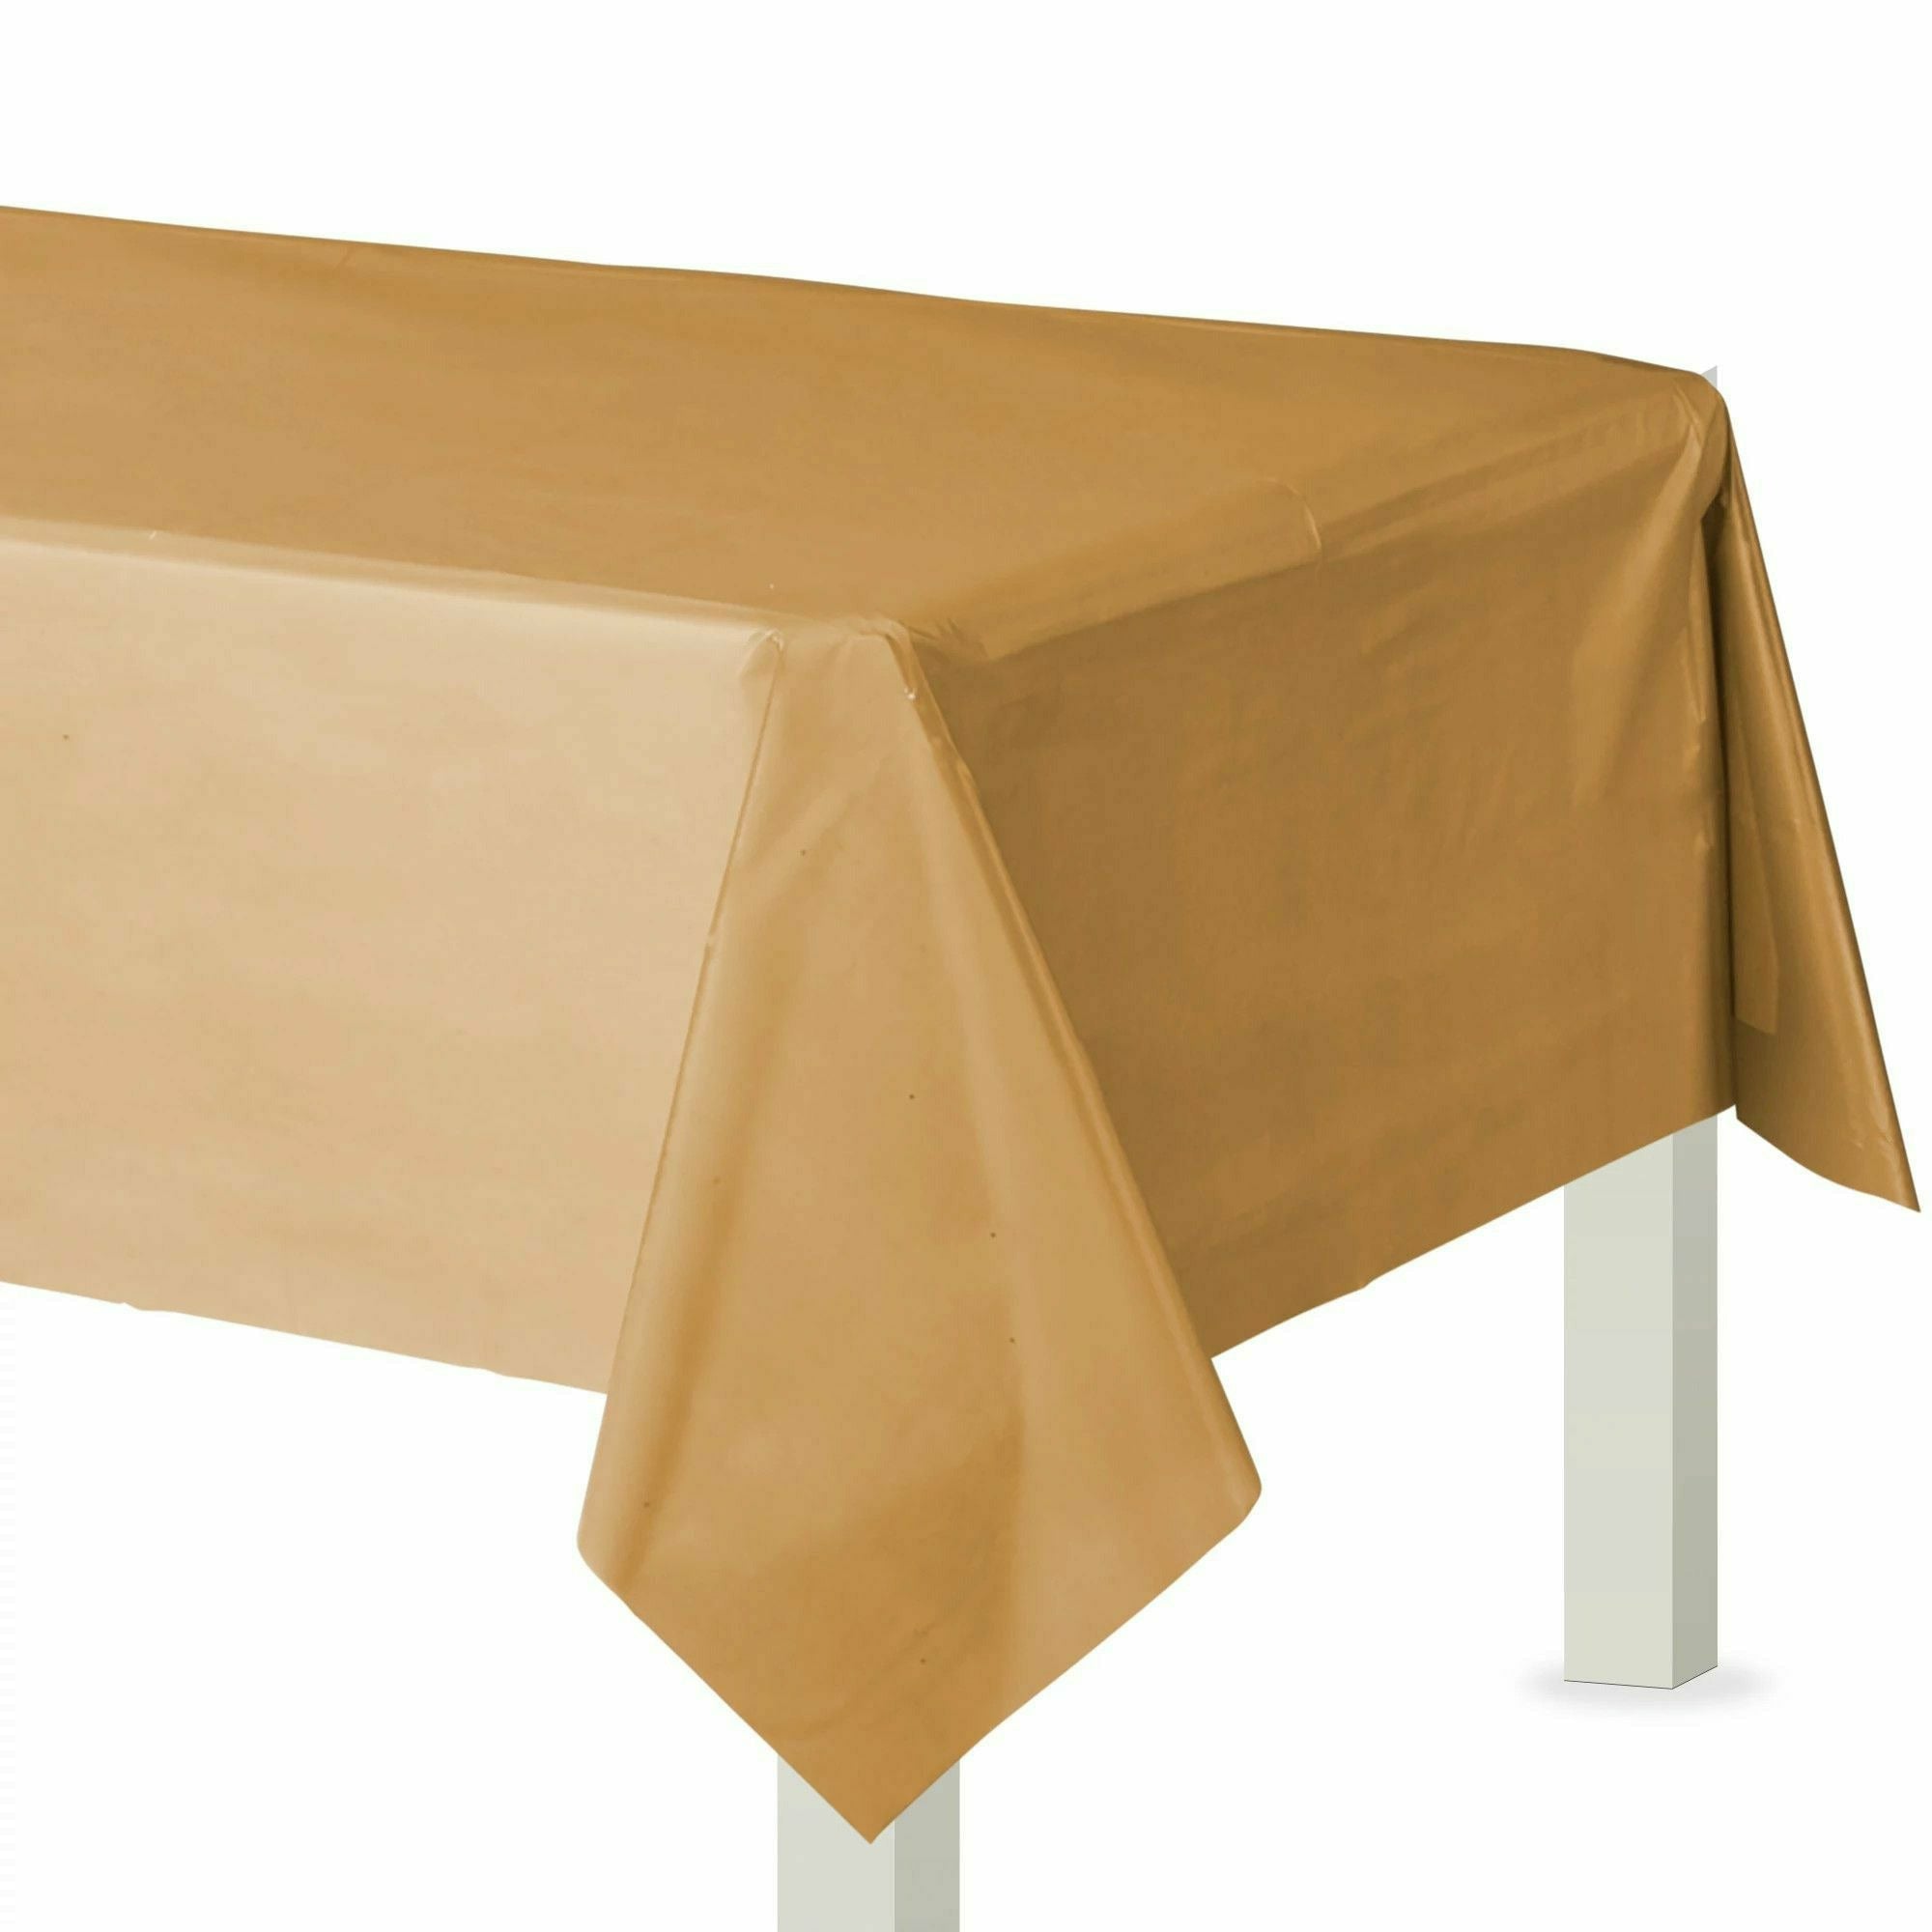 Amscan BASIC Gold - Flannel Backed Table Cover